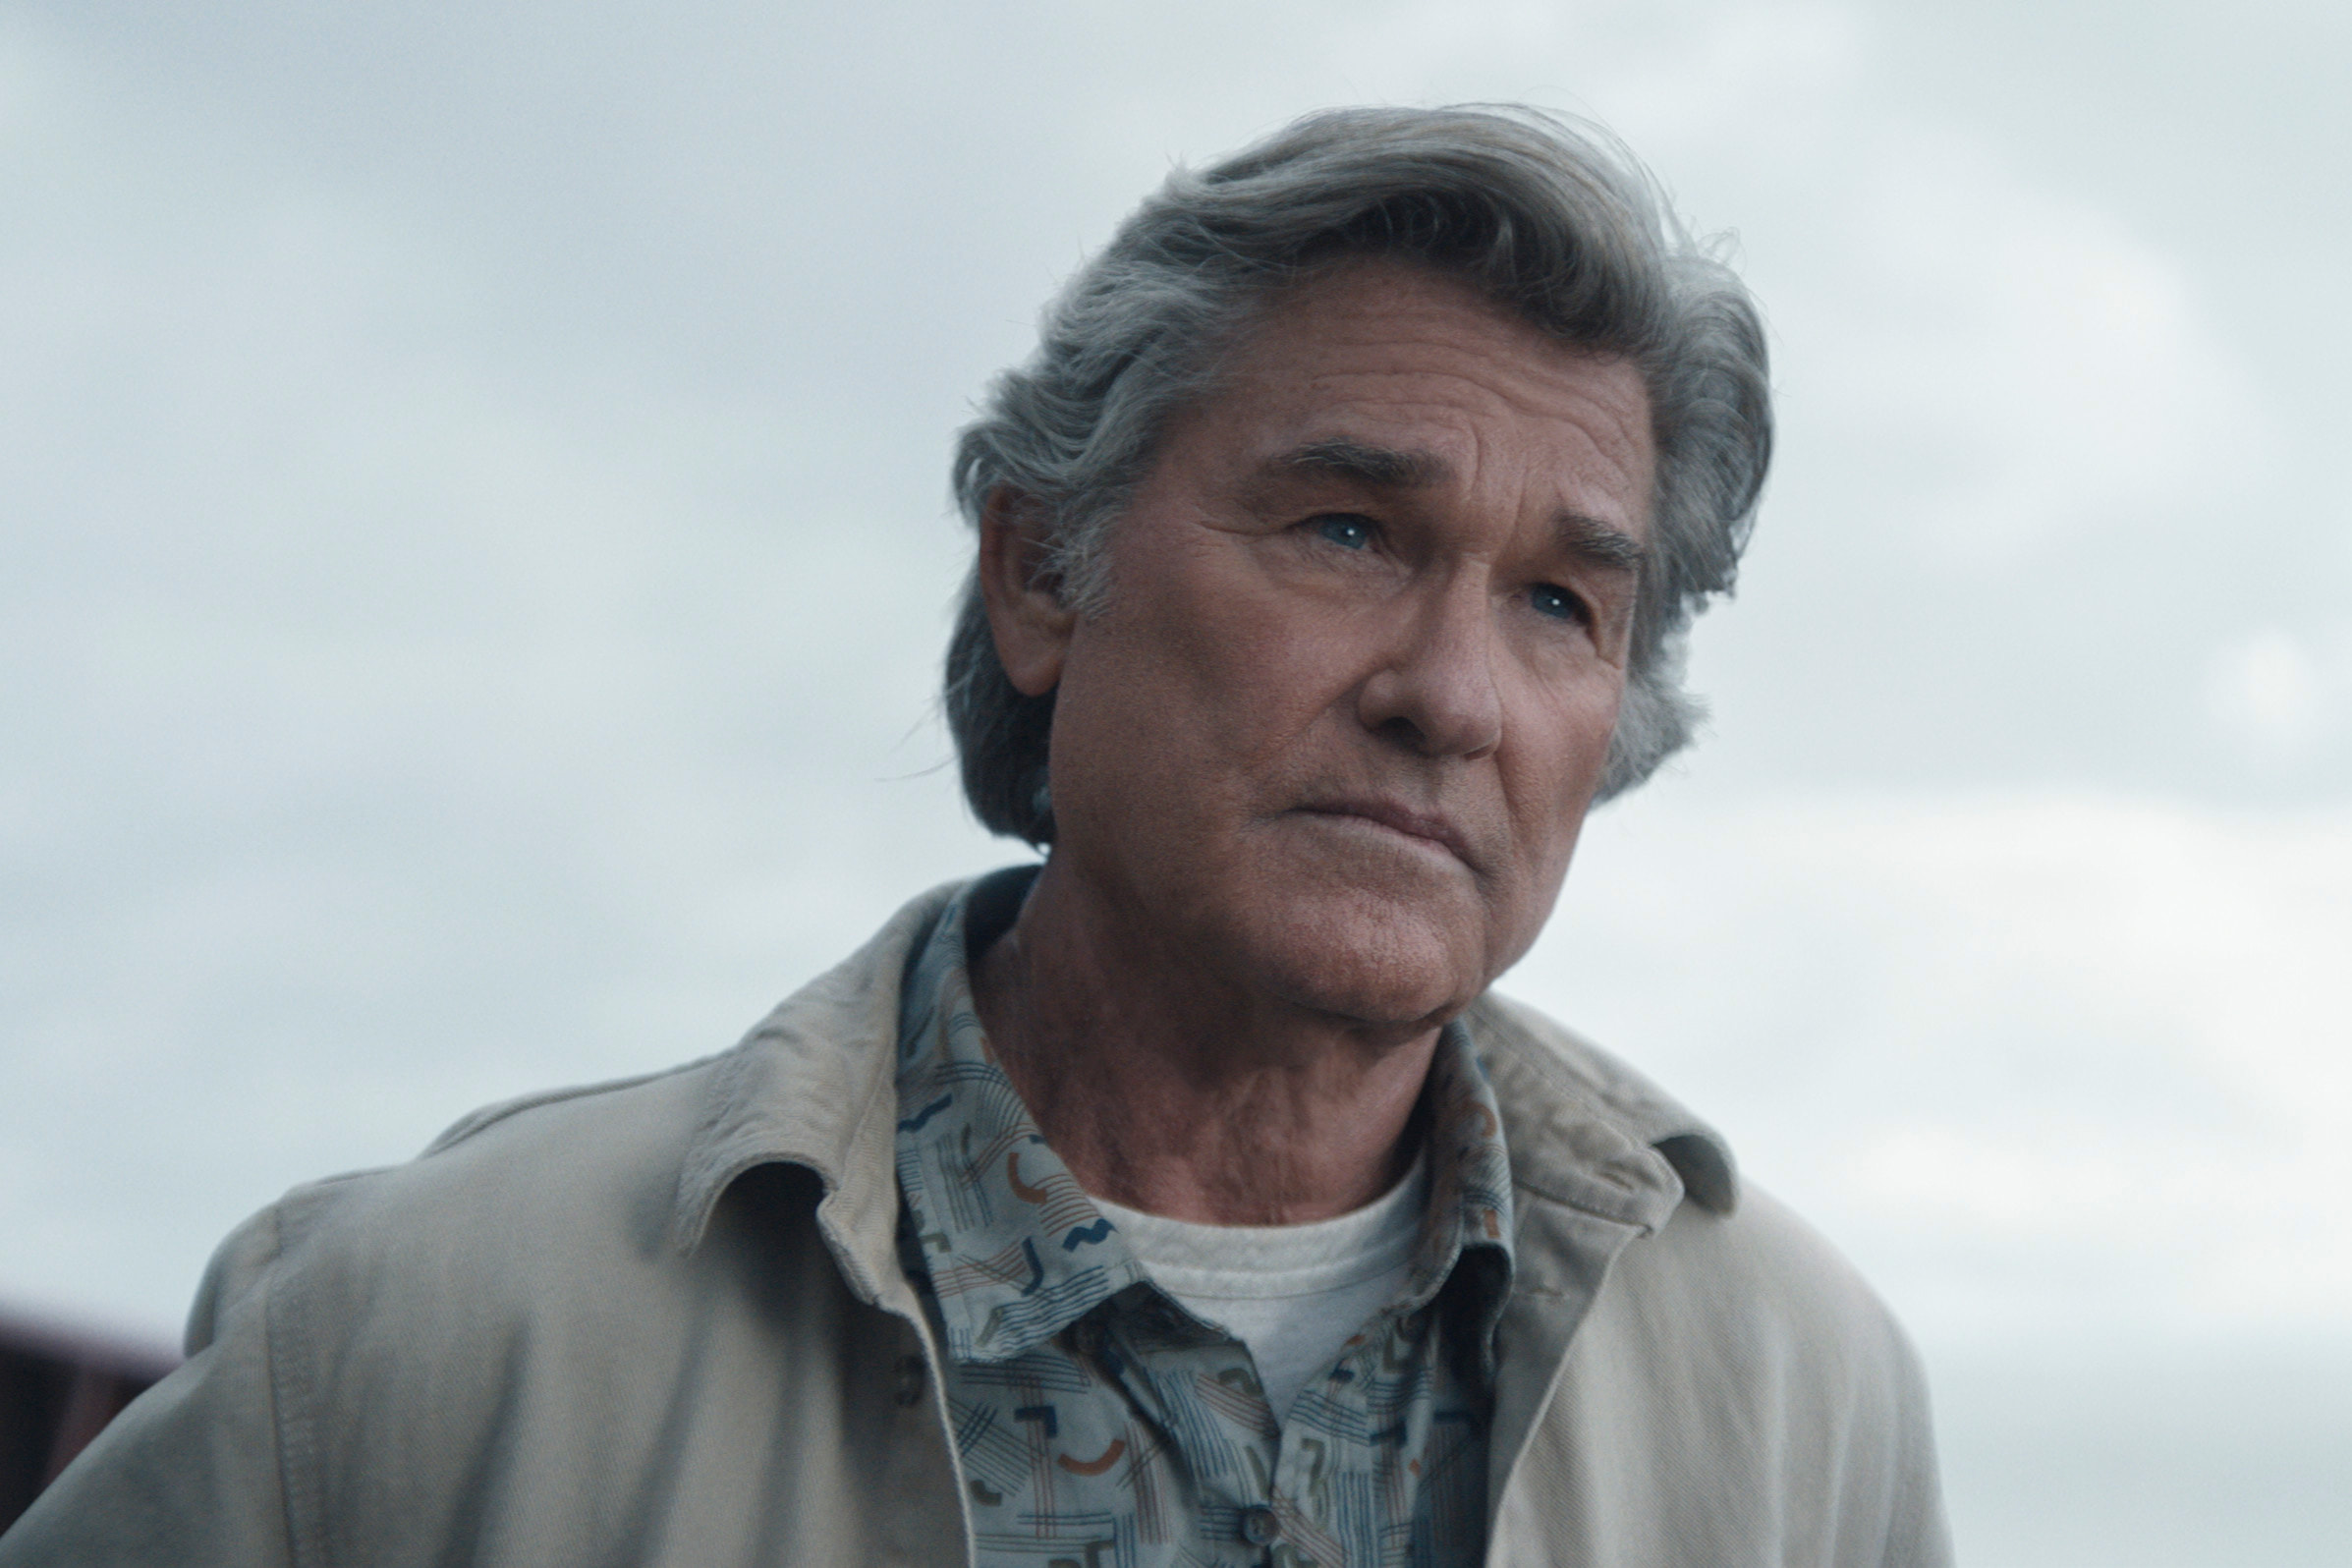 How the Godzilla TV Show Monarch Convinced Kurt Russell and His Son Wyatt to Work Together Again